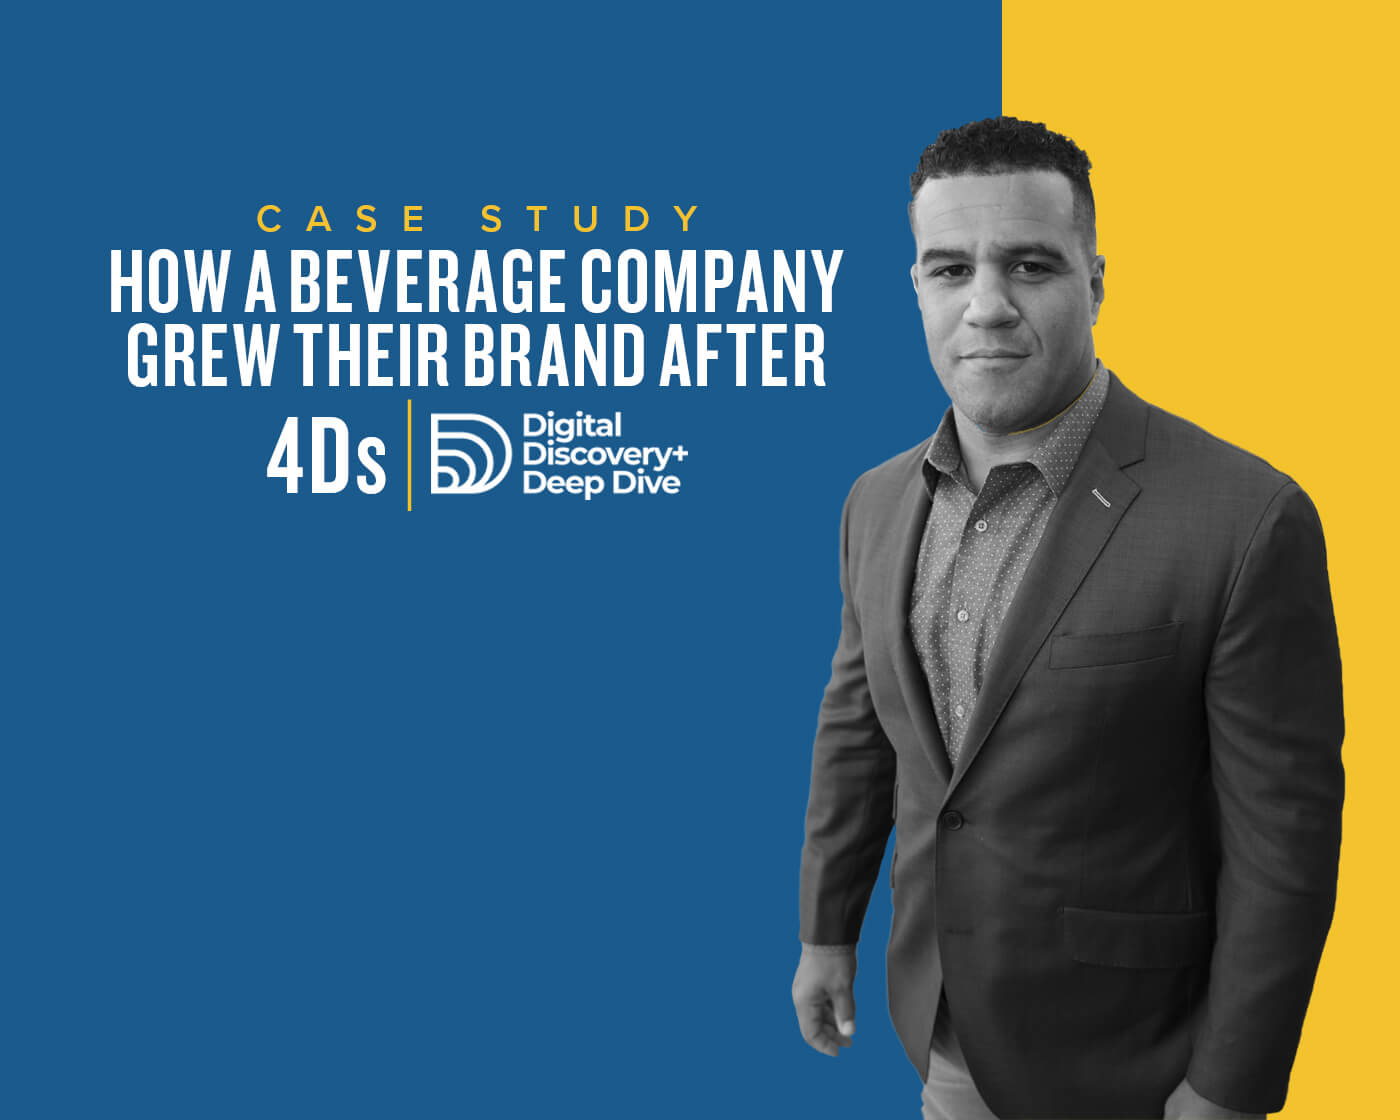 How a Beverage Company Systematically Grew Their Brand After 4Ds